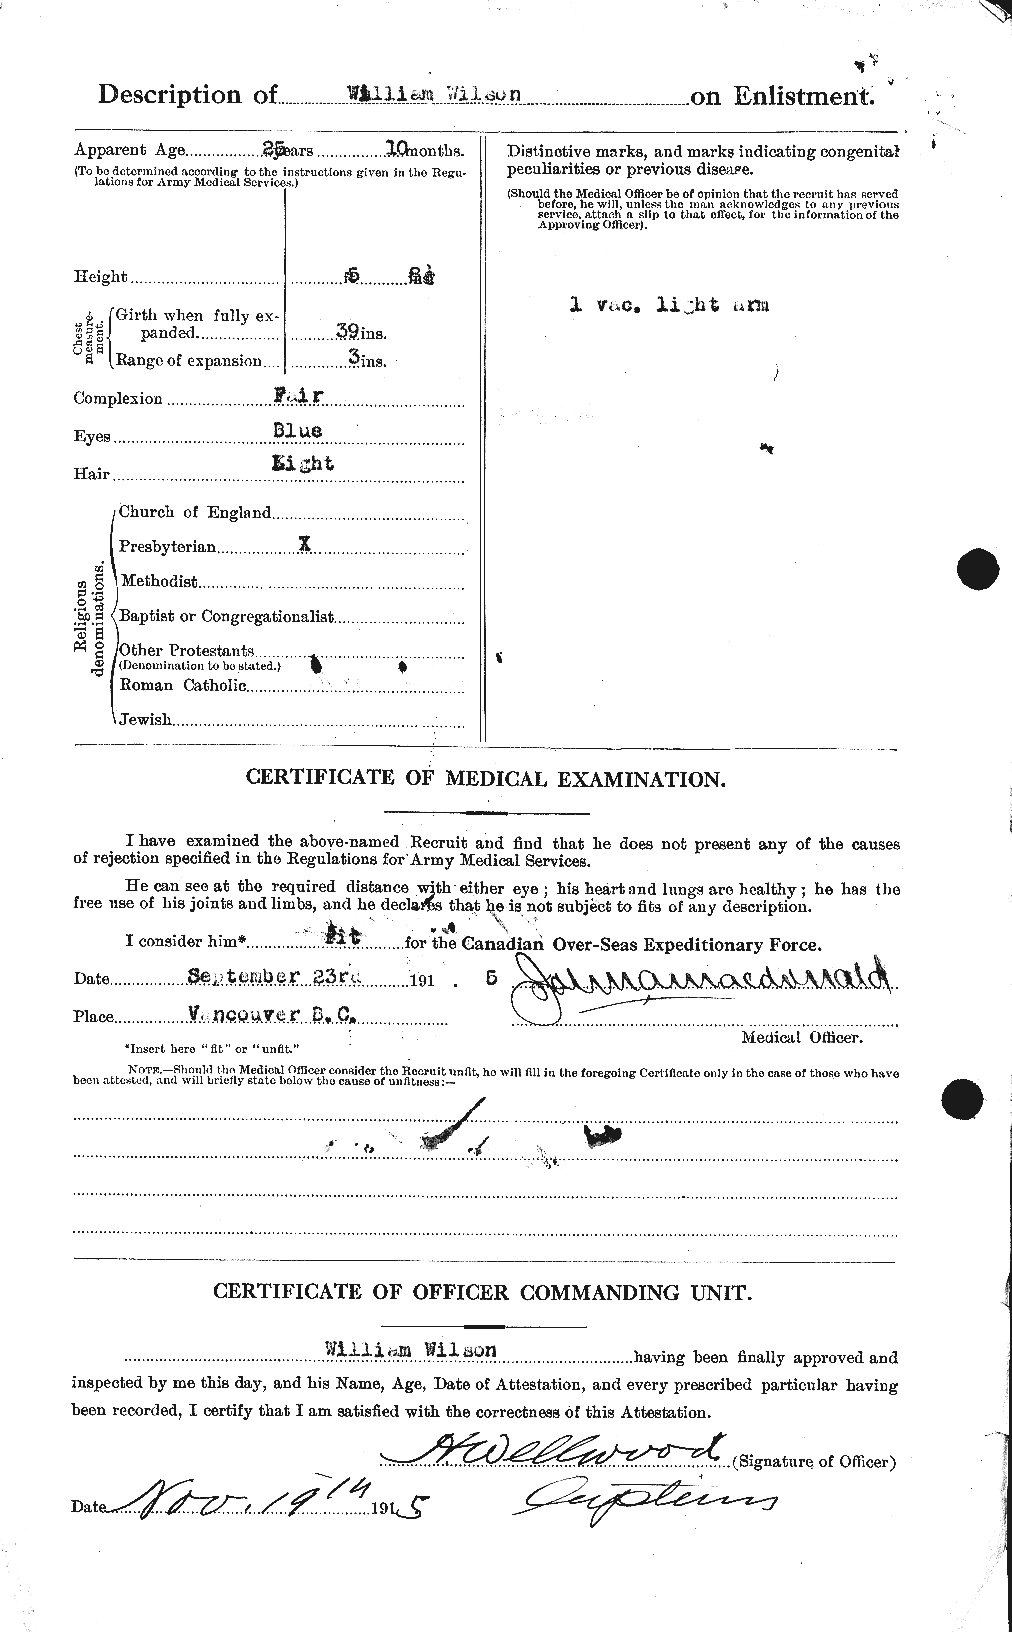 Personnel Records of the First World War - CEF 681895b